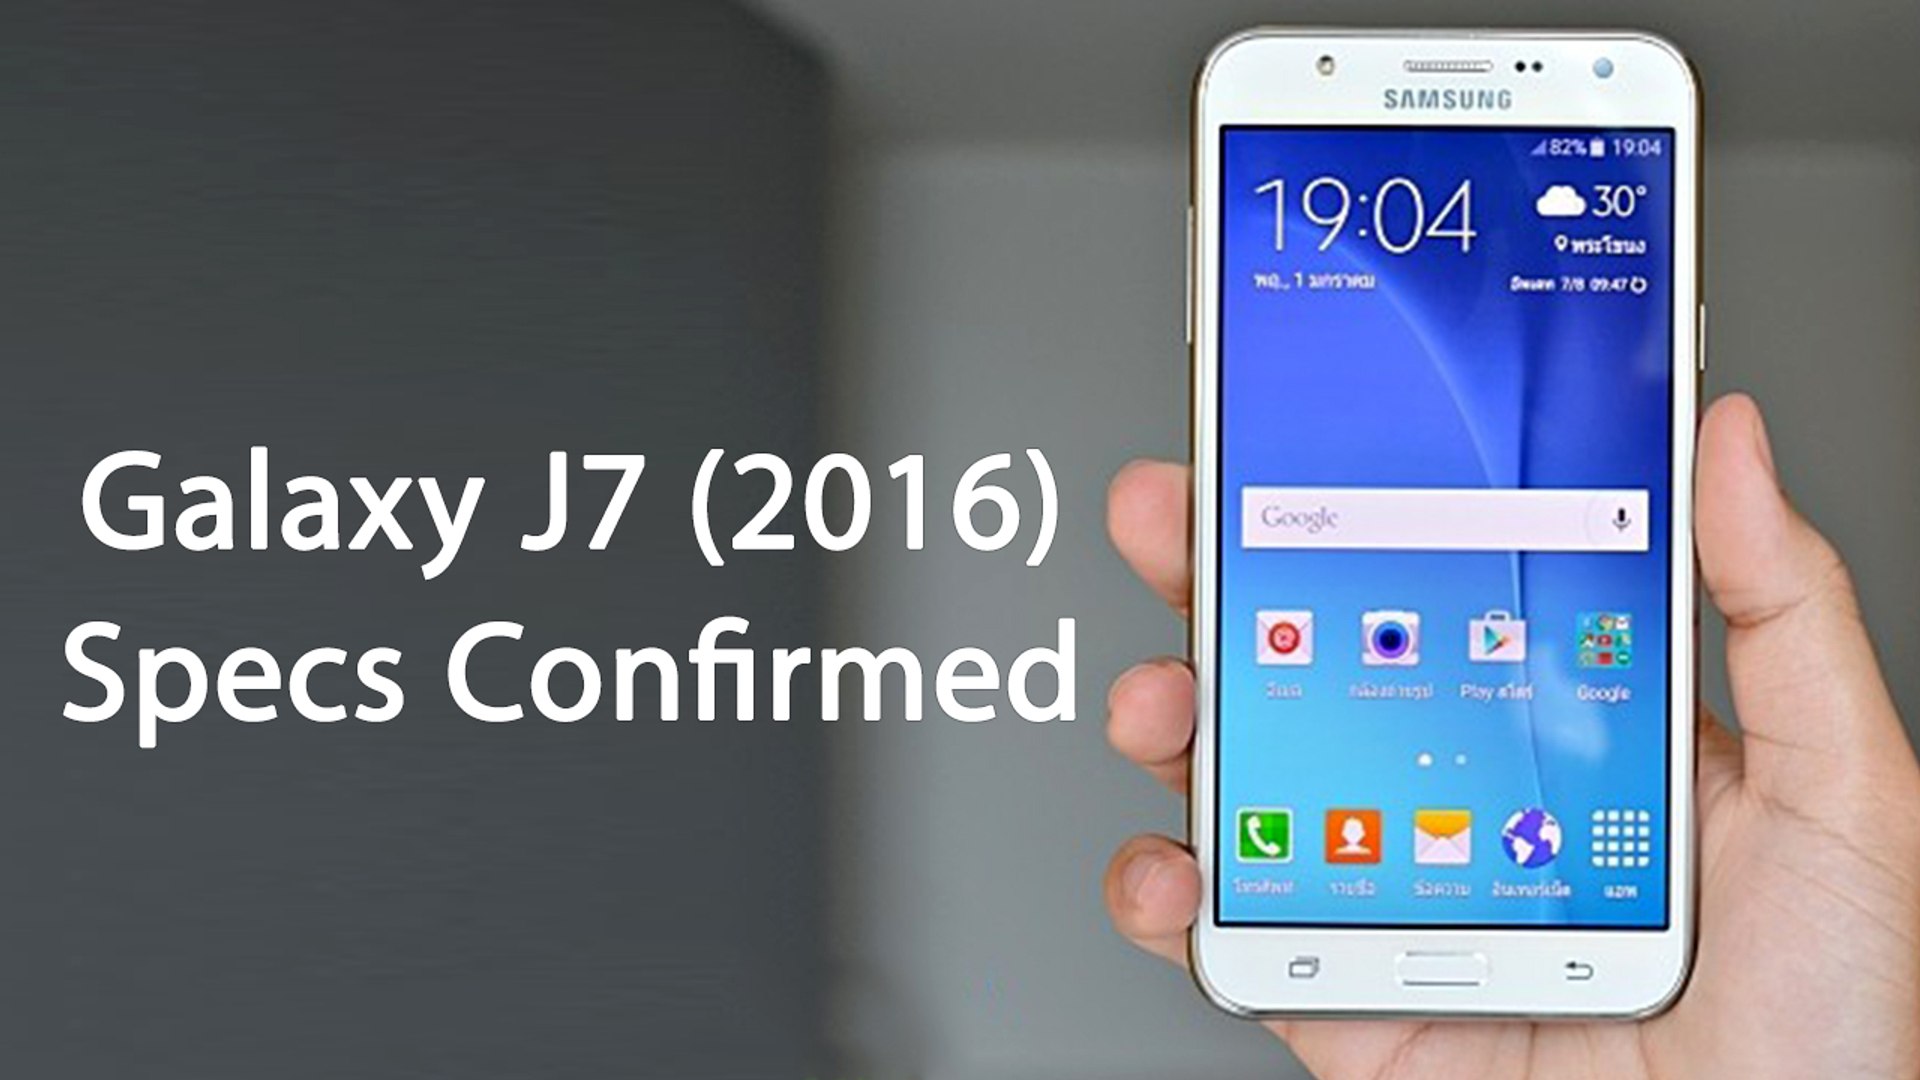 Samsung Galaxy J7 (2016) Specs Confirmed From Kernel Source Code - video  Dailymotion